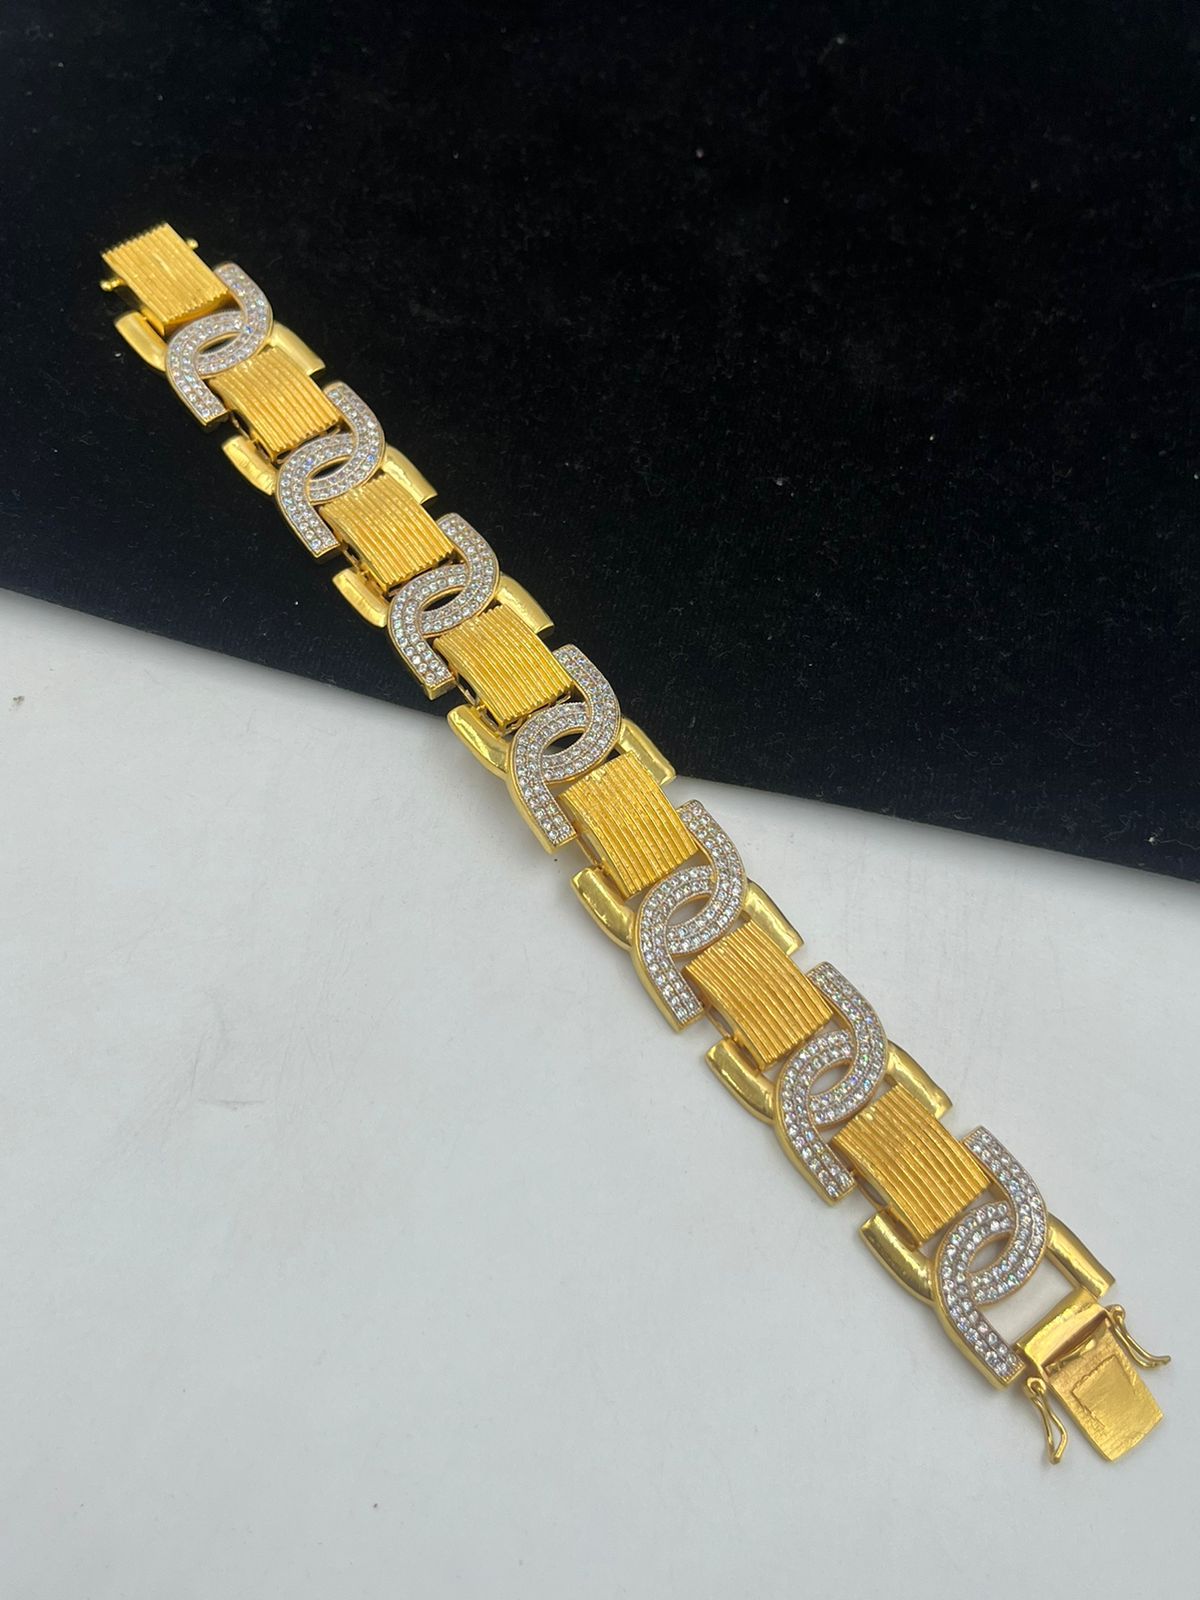 Slider Bracelets Crystals and Pearls Latest One Gram Gold Jewellery Designs  B24855